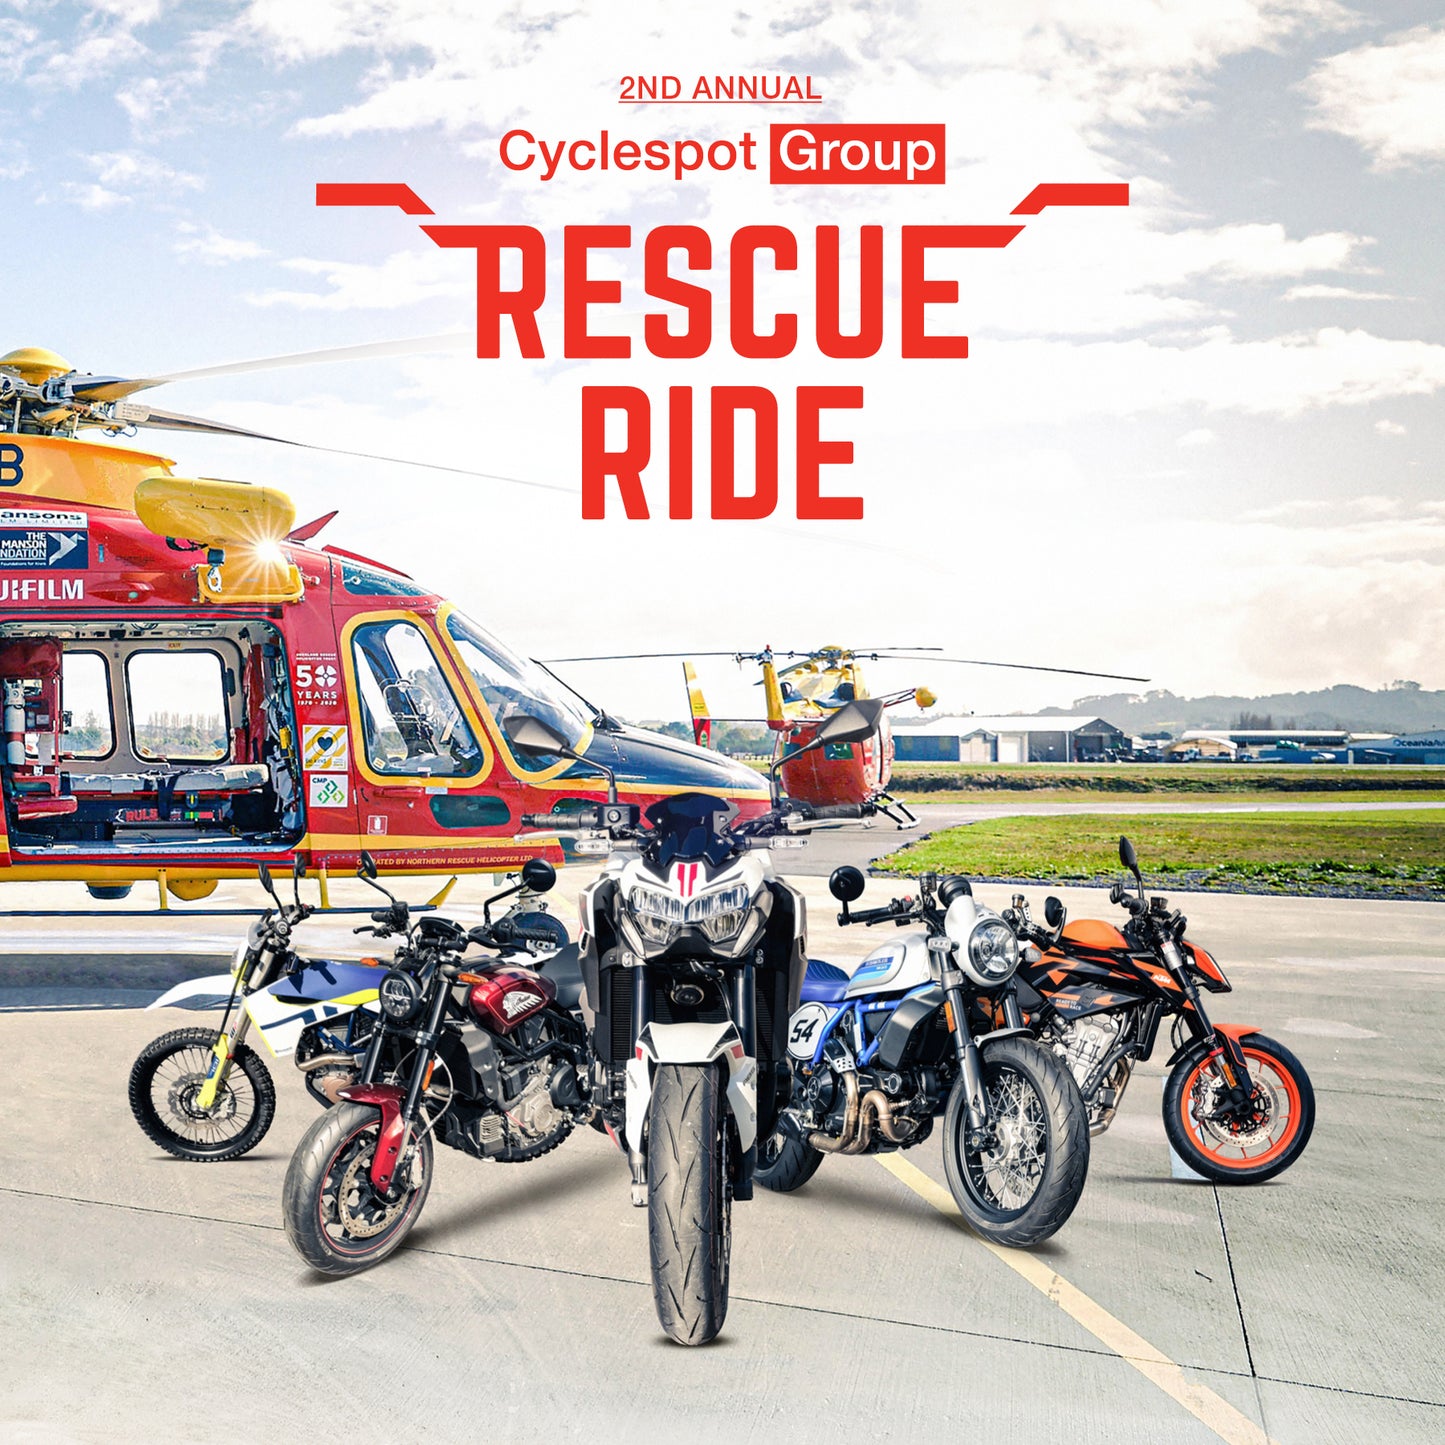 Cyclespot Group Rescue Ride Tickets